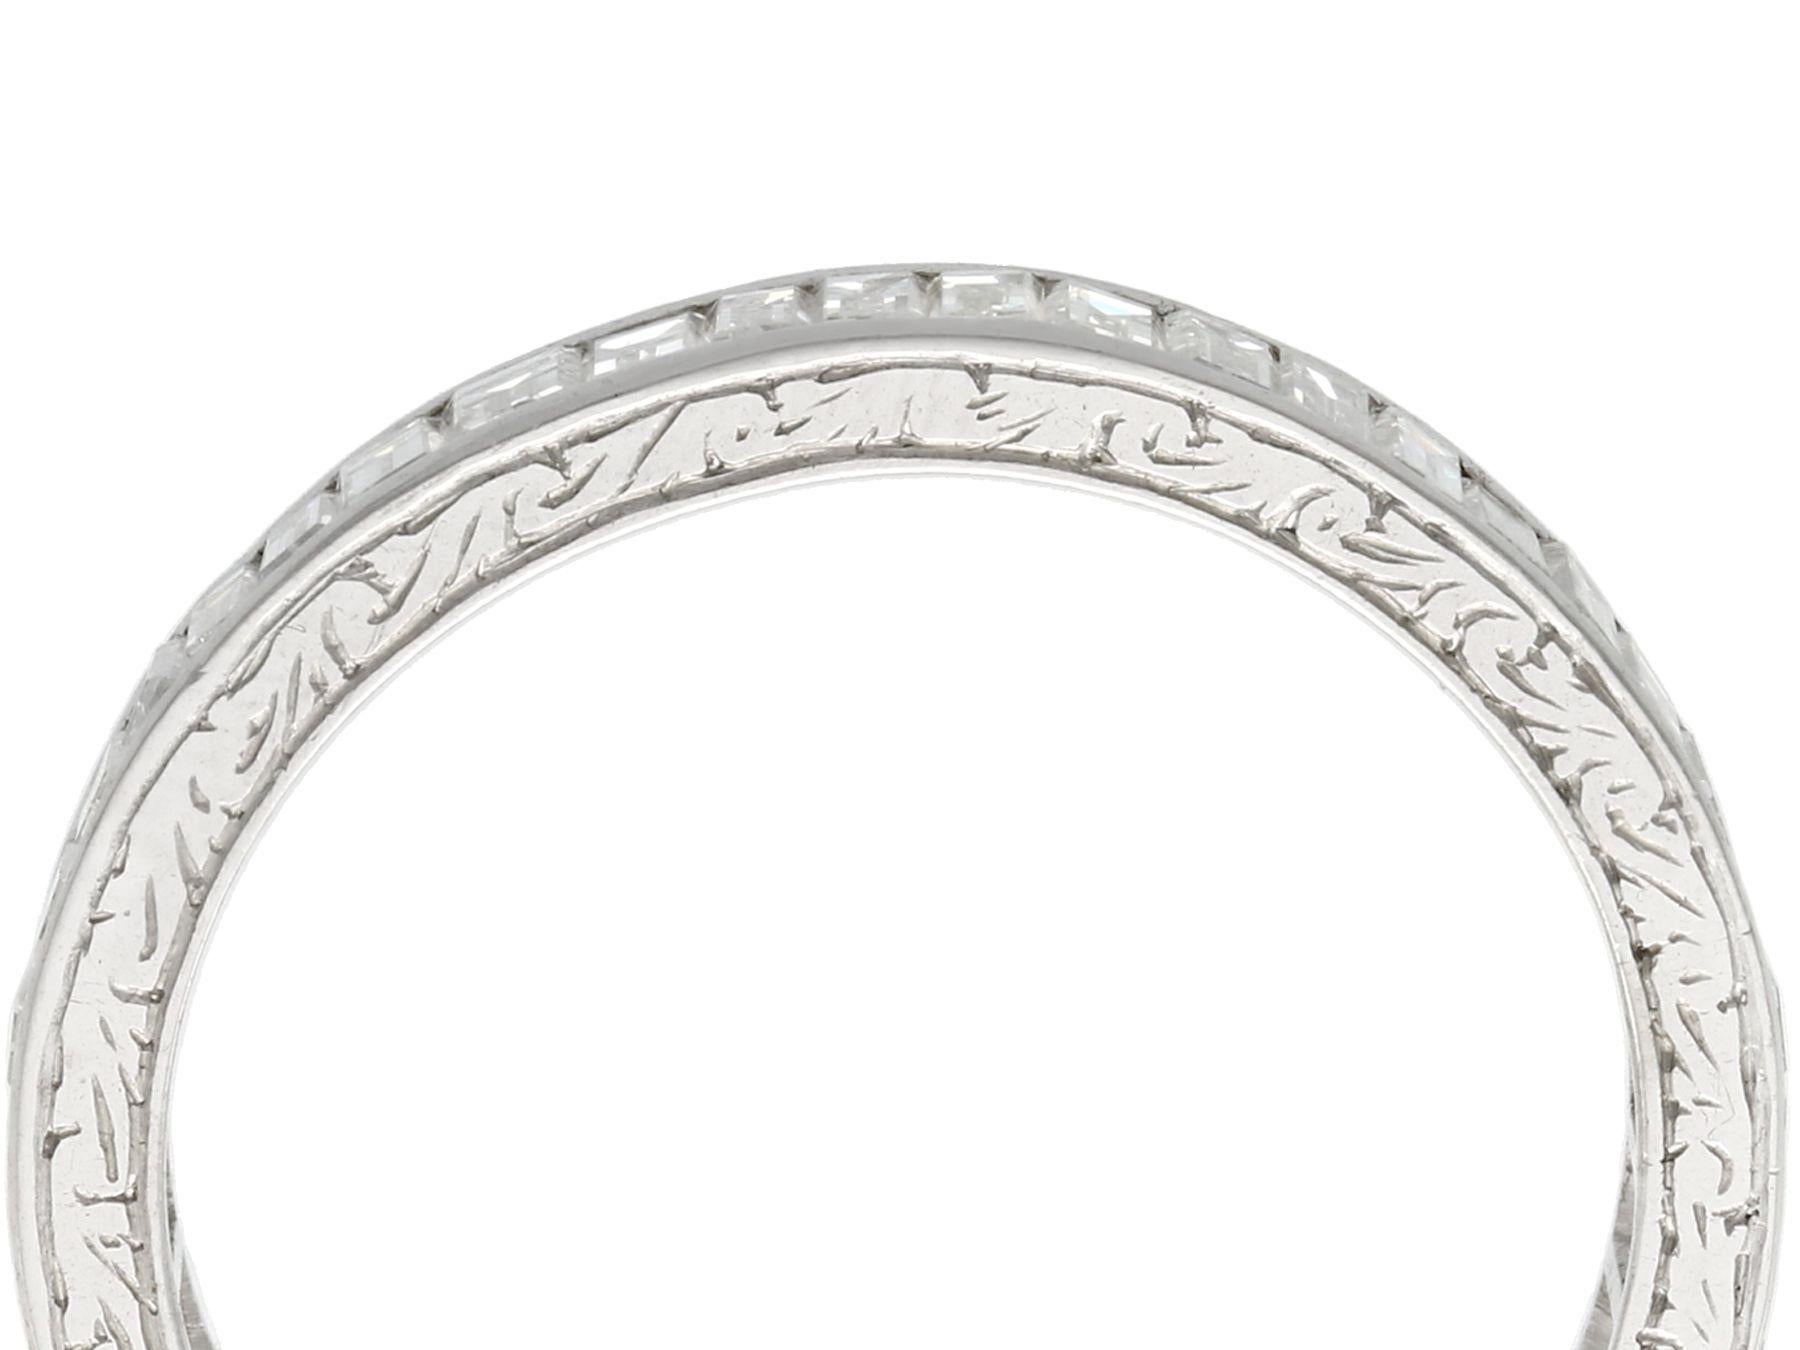 A stunning, fine and impressive antique 1930's 3.80 carat diamond and platinum full eternity ring; part of our diverse baguetter cut diamond jewellery and estate jewelry collections.

This stunning antique eternity ring has been crafted in